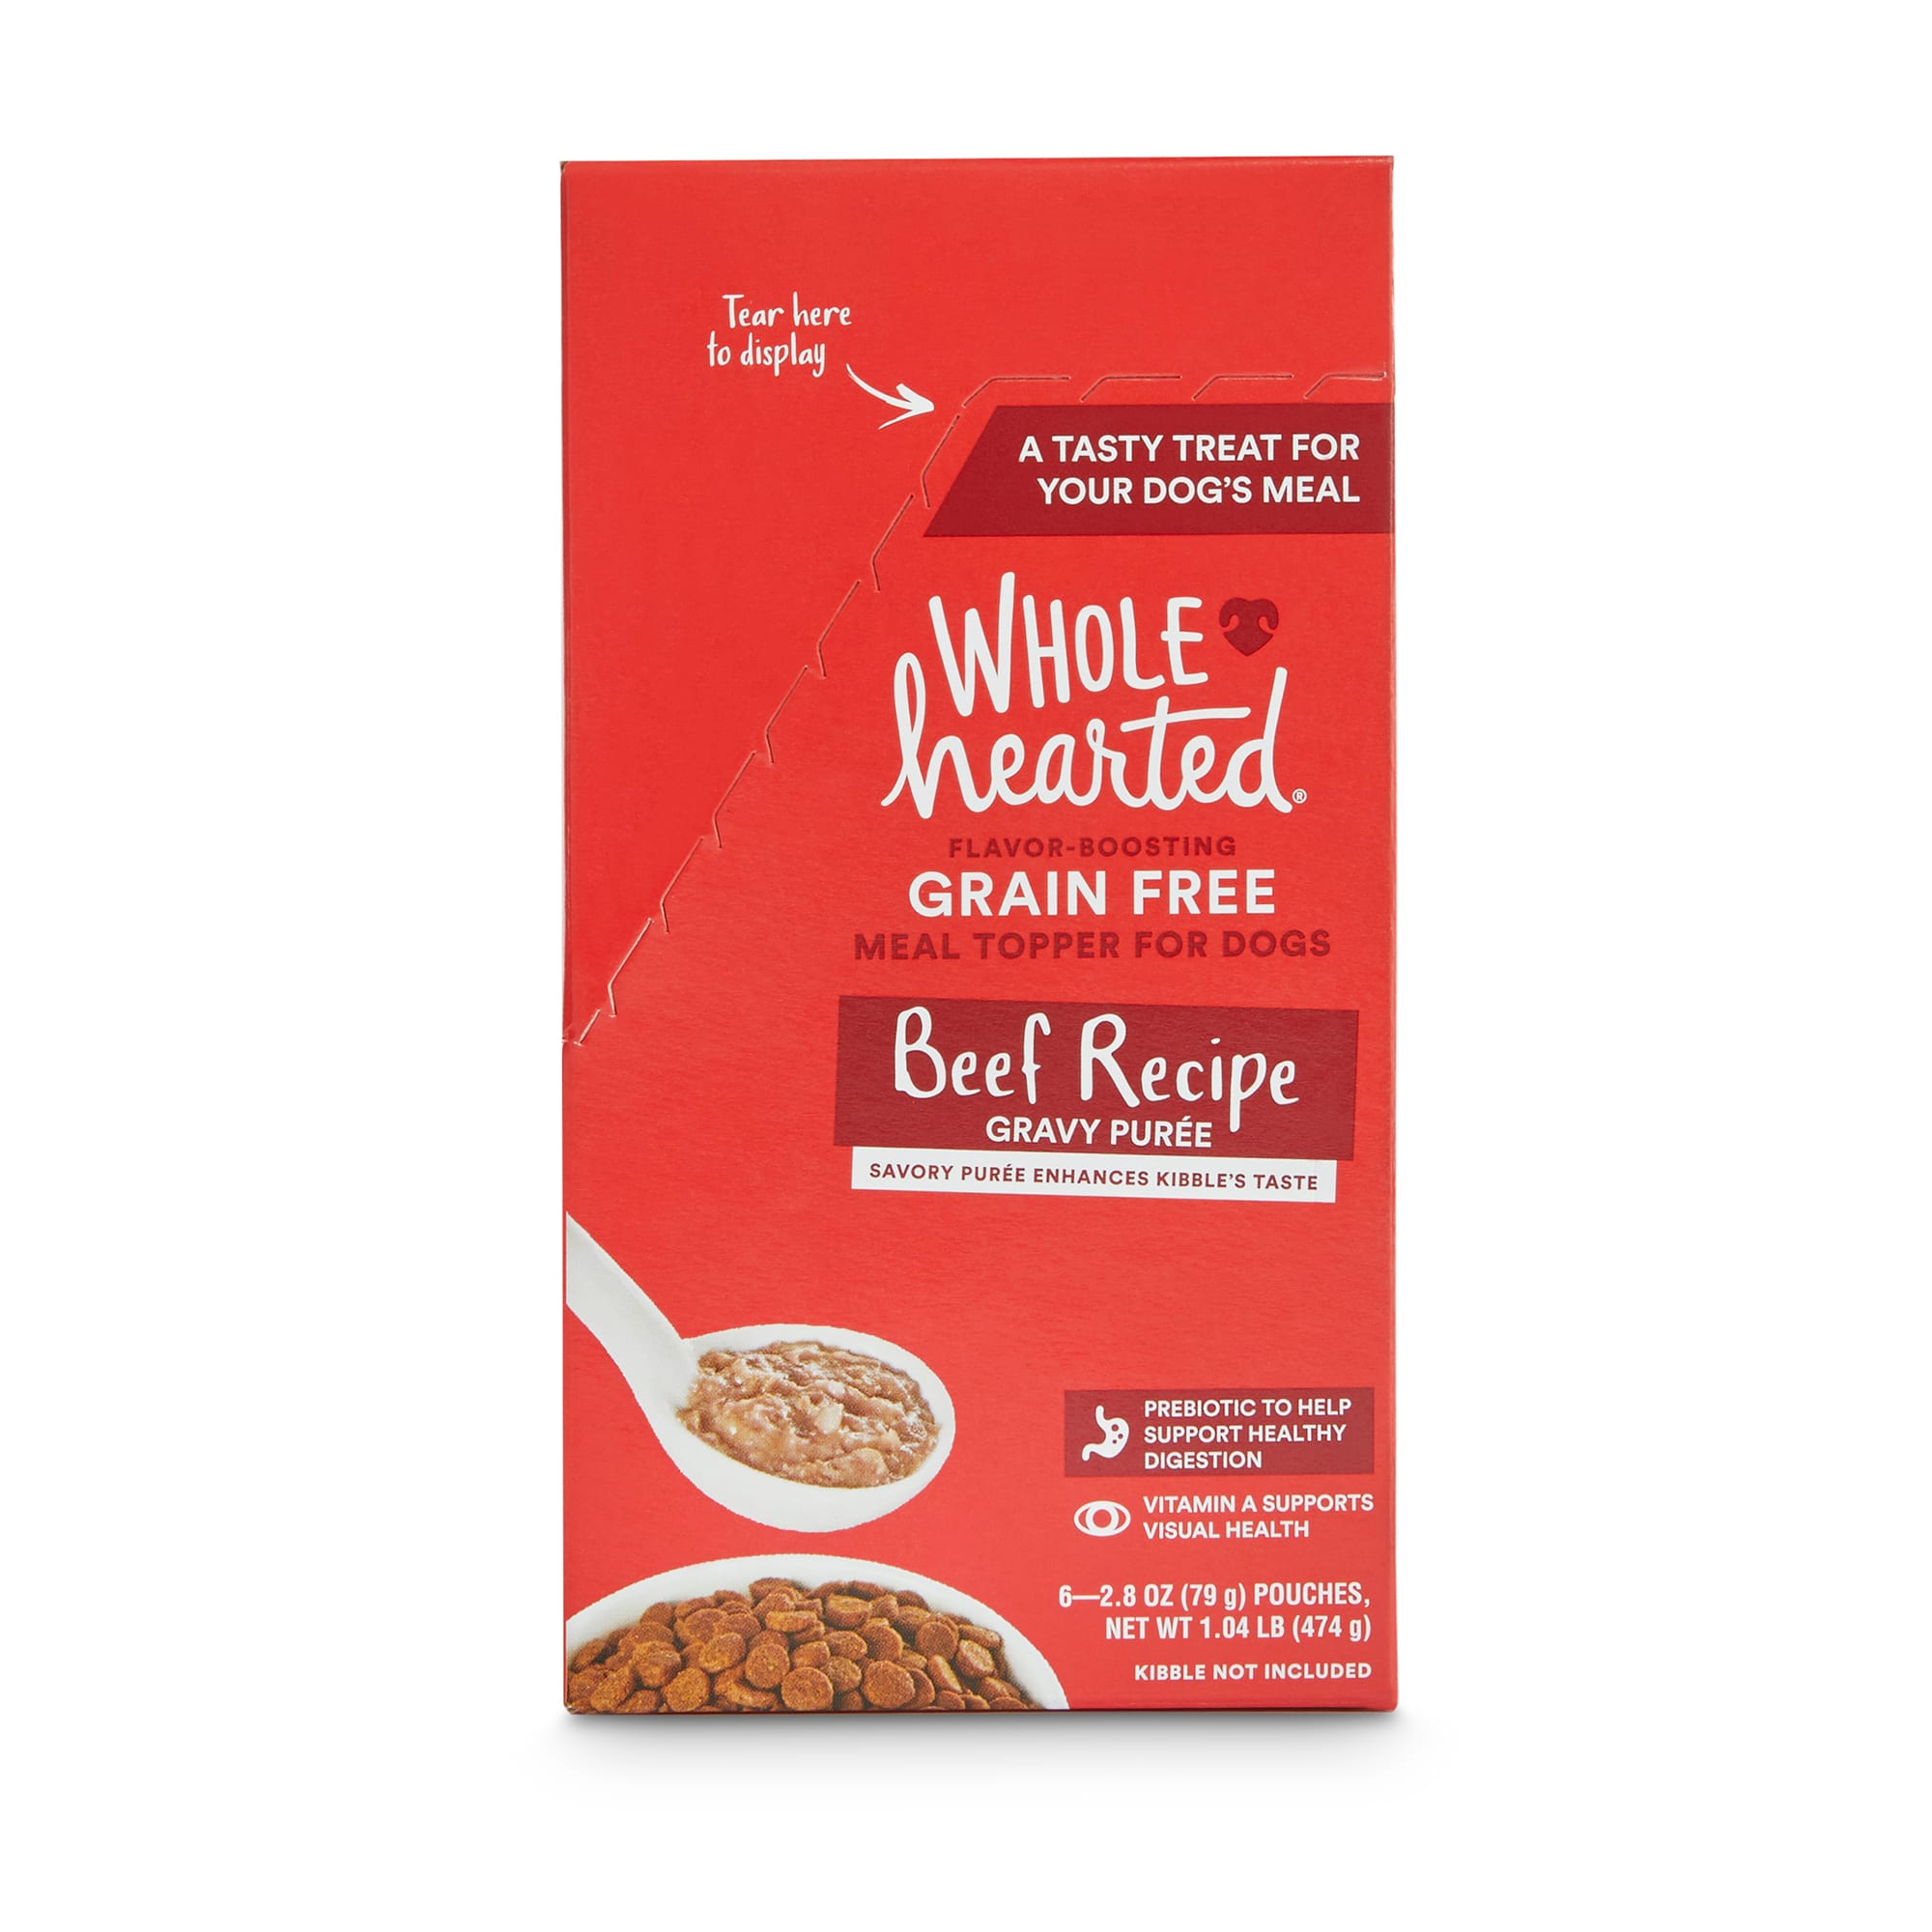 WholeHearted Grain-Free Beef Recipe Gravy Puree Wet Dog Meal Topper, 2. ...